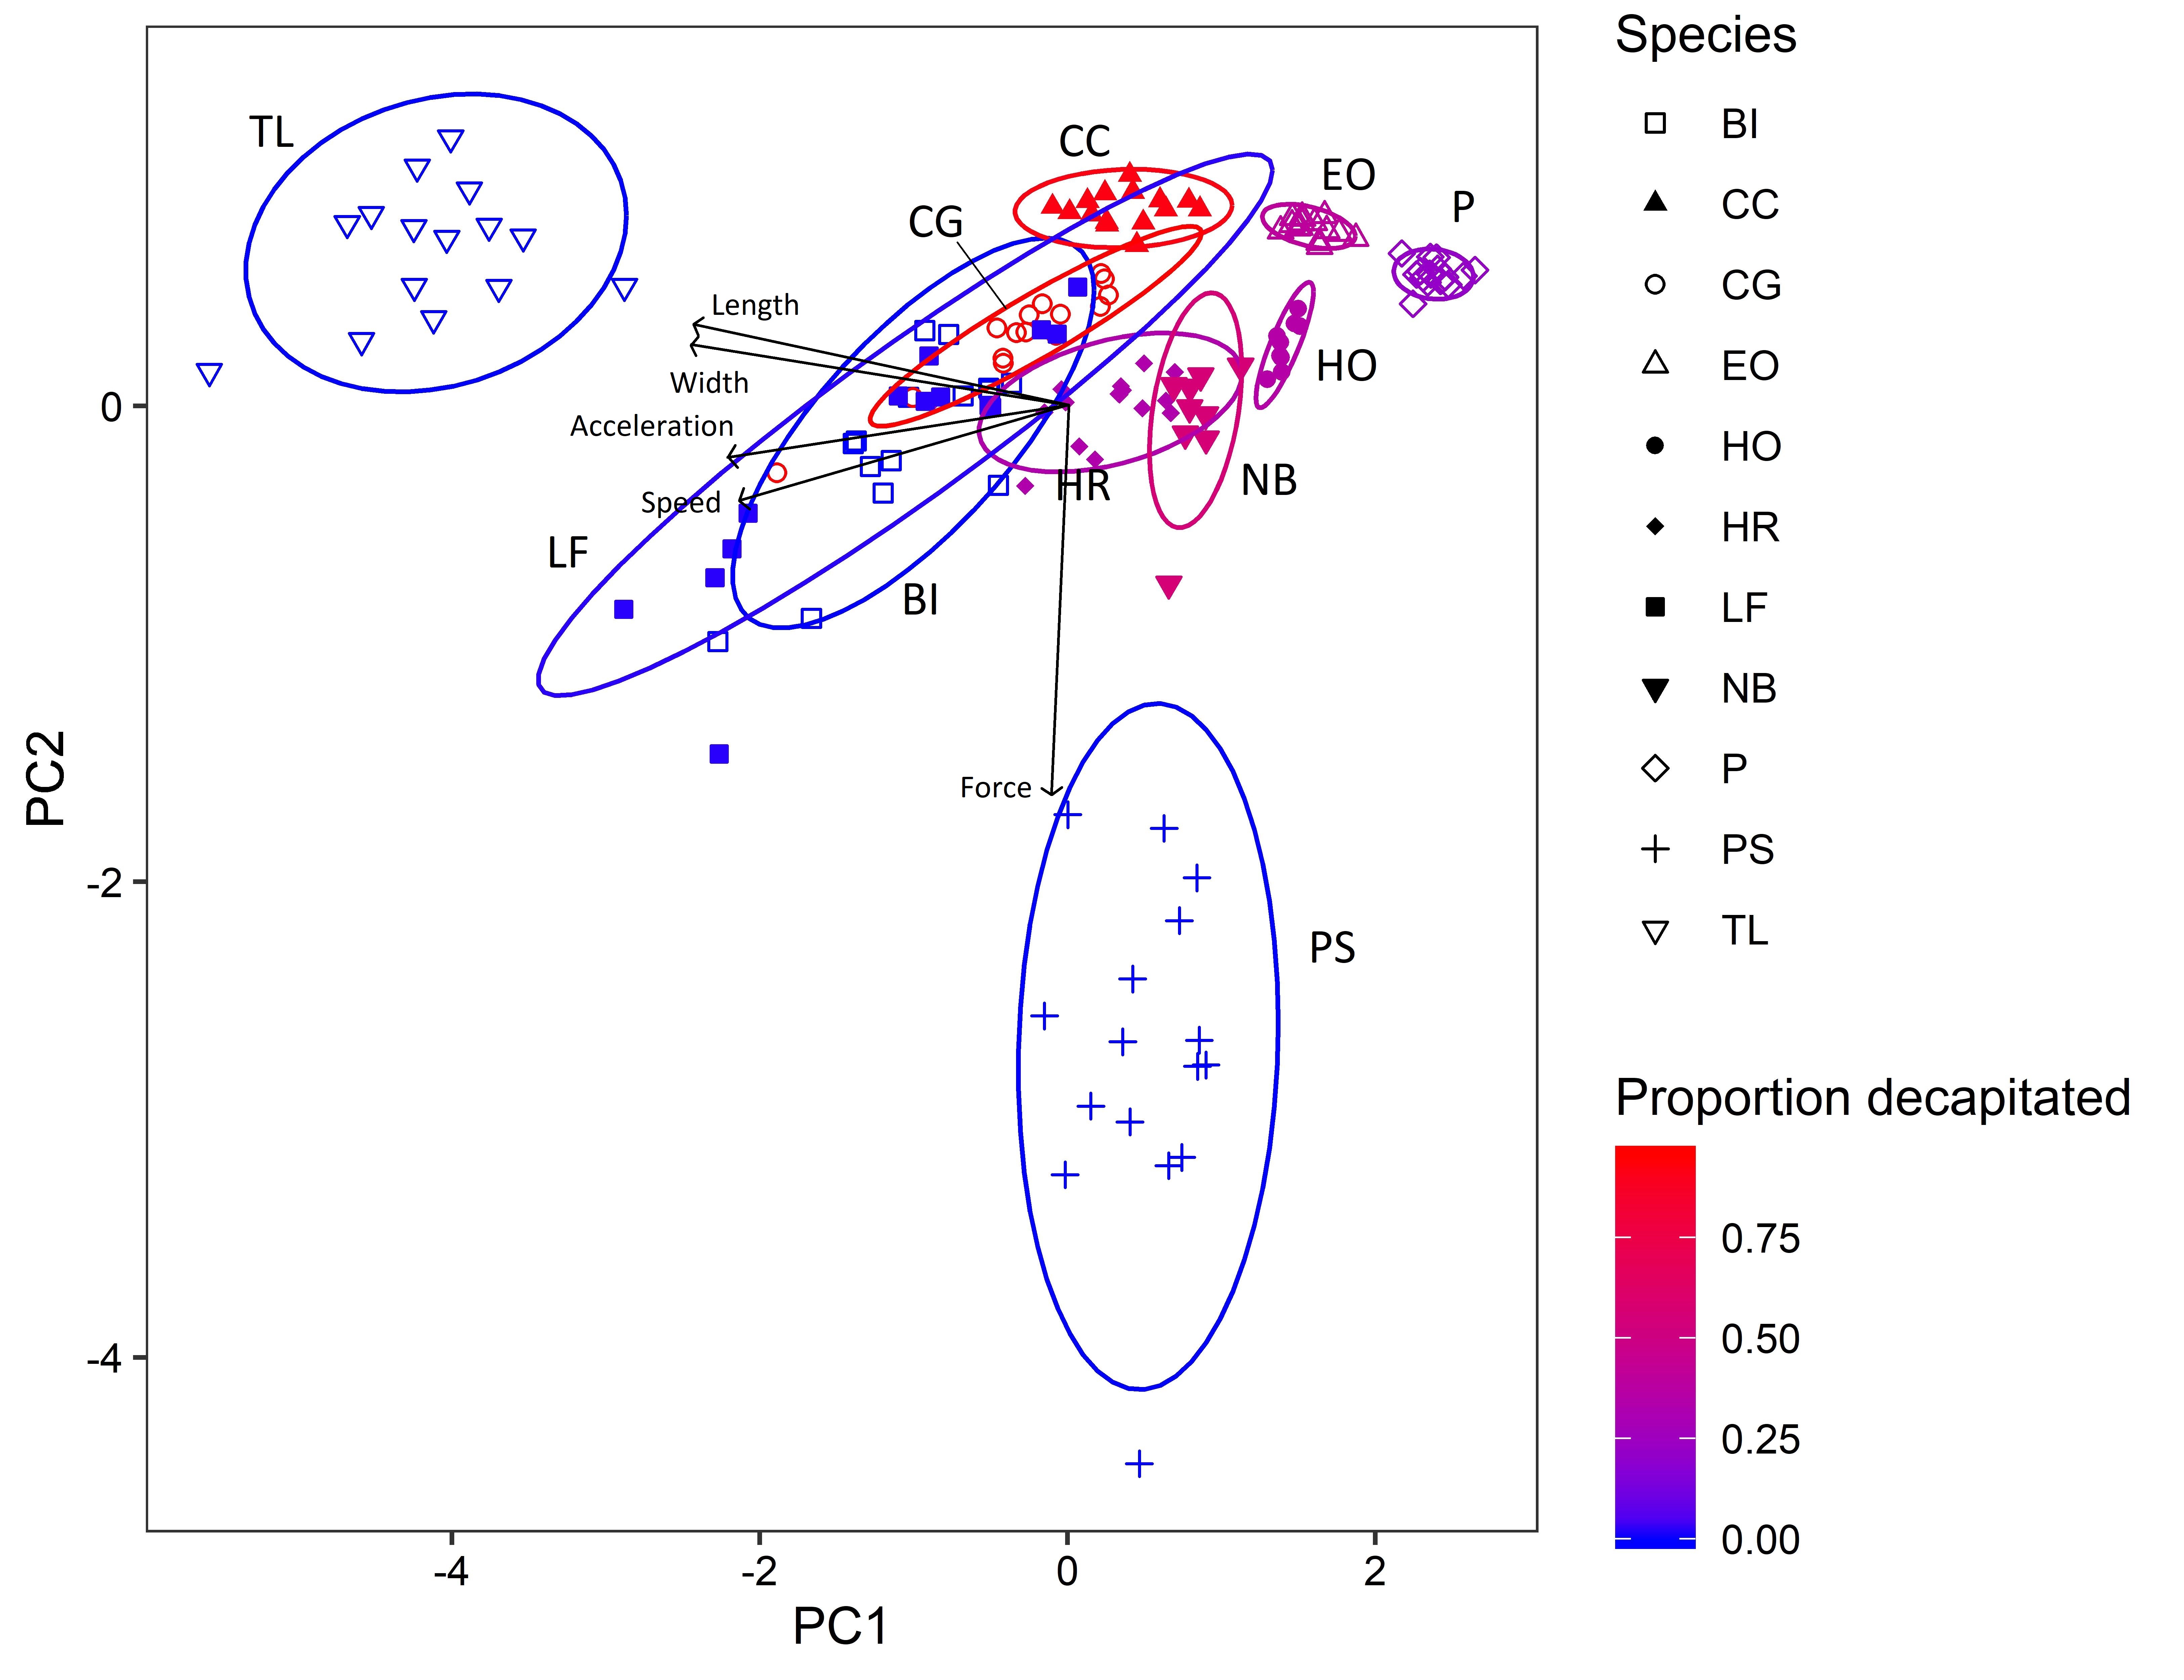 This is a figure illustrating the results of a principal components analysis of traits of several aquatic beetle species and their susceptibility to a predator